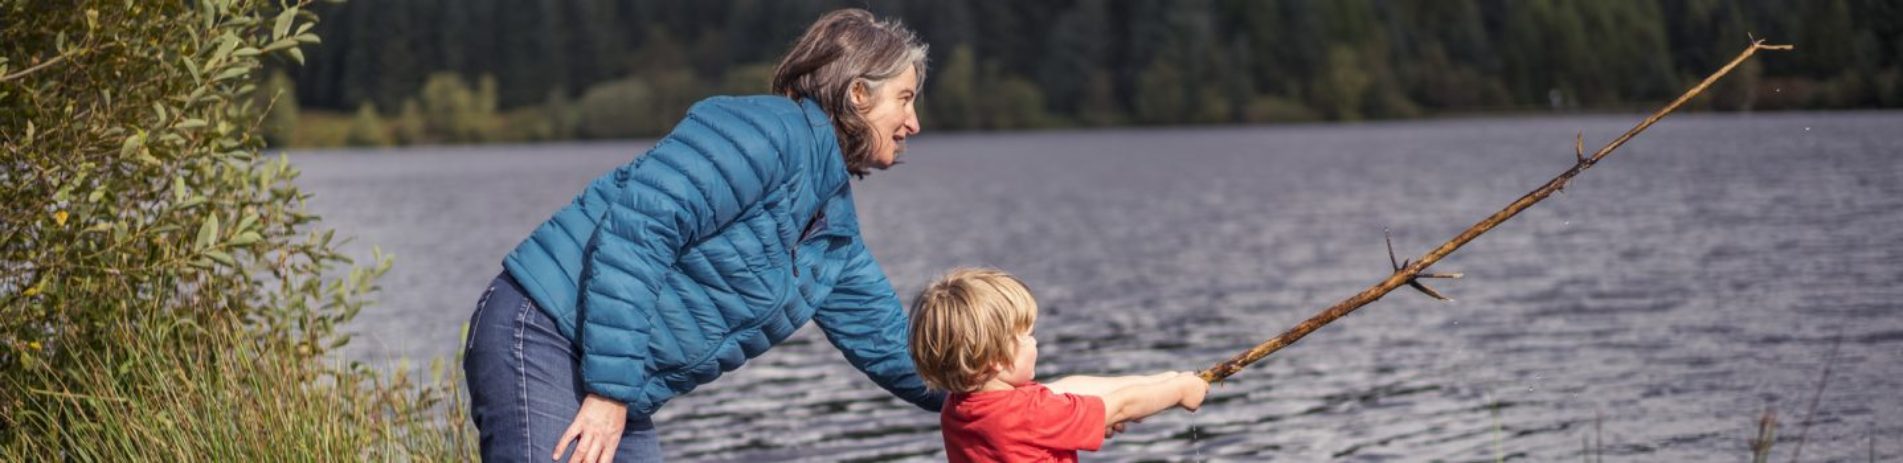 woman-in-blue-outdoor-coat-helping-young-boy-in-red-t-shirt-hold-longh-stick-over-loch-drunkie-mock-fishing